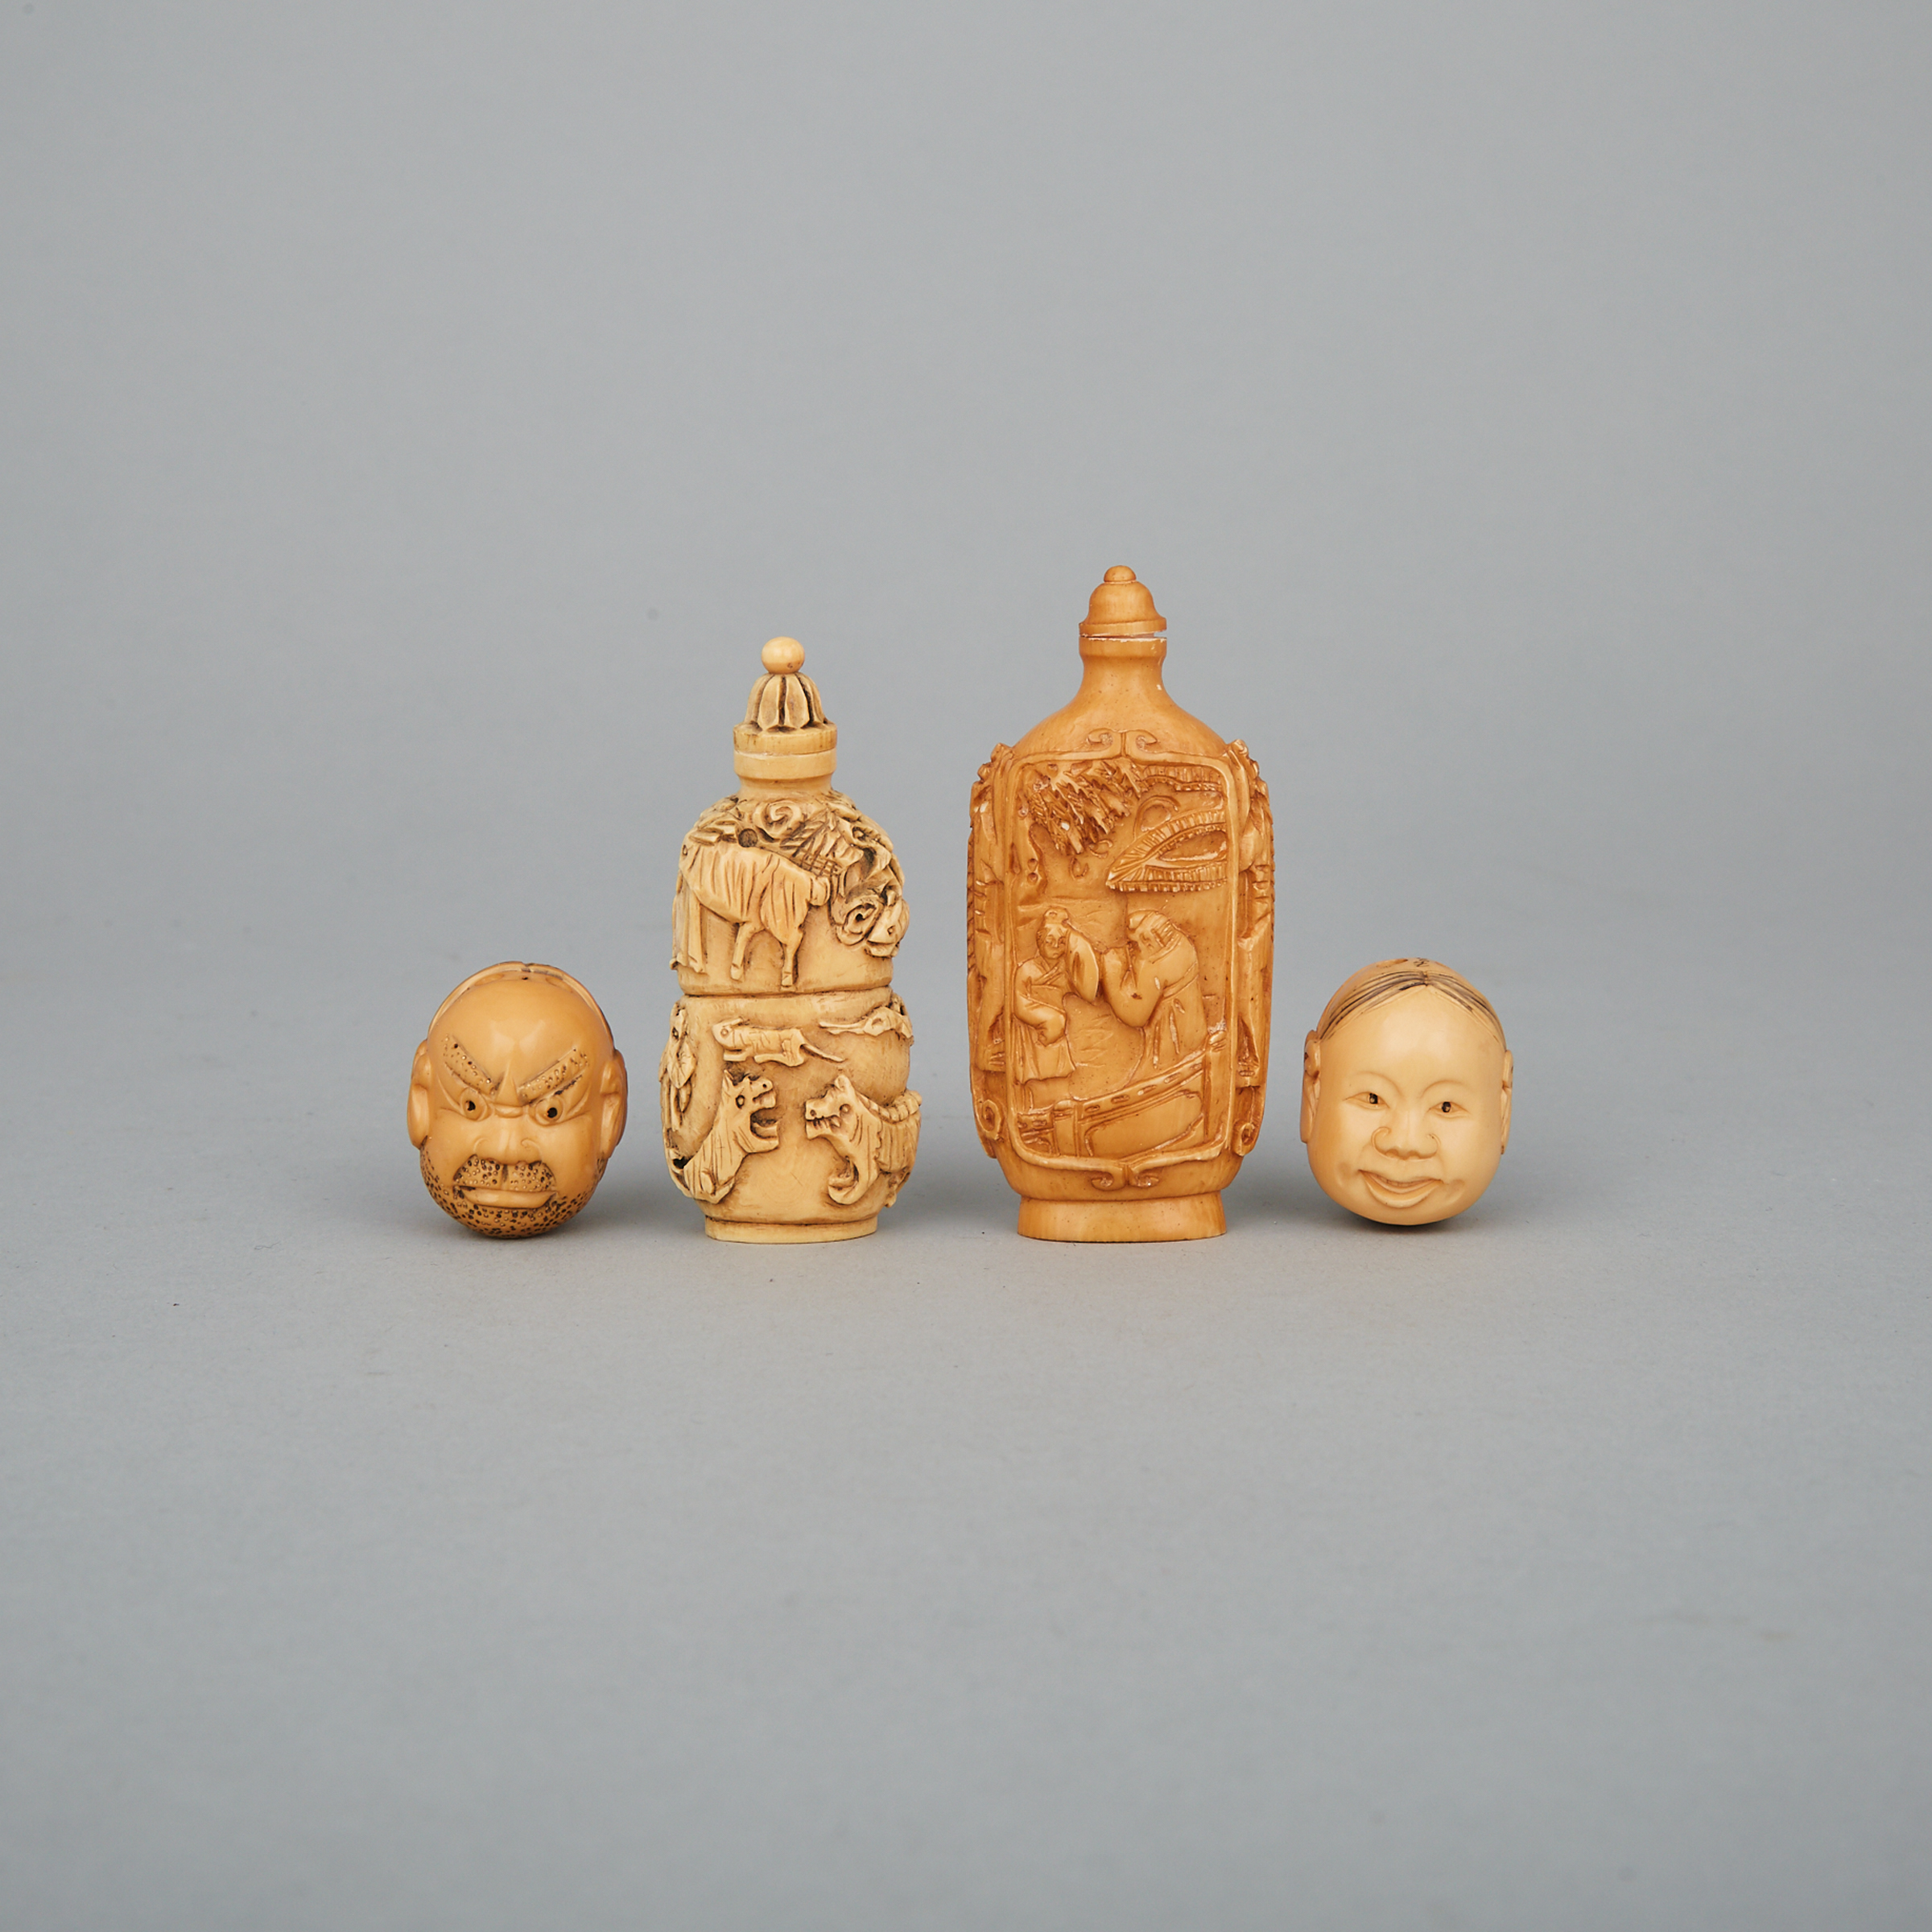 Two Ivory Snuff Bottles, Circa 1940